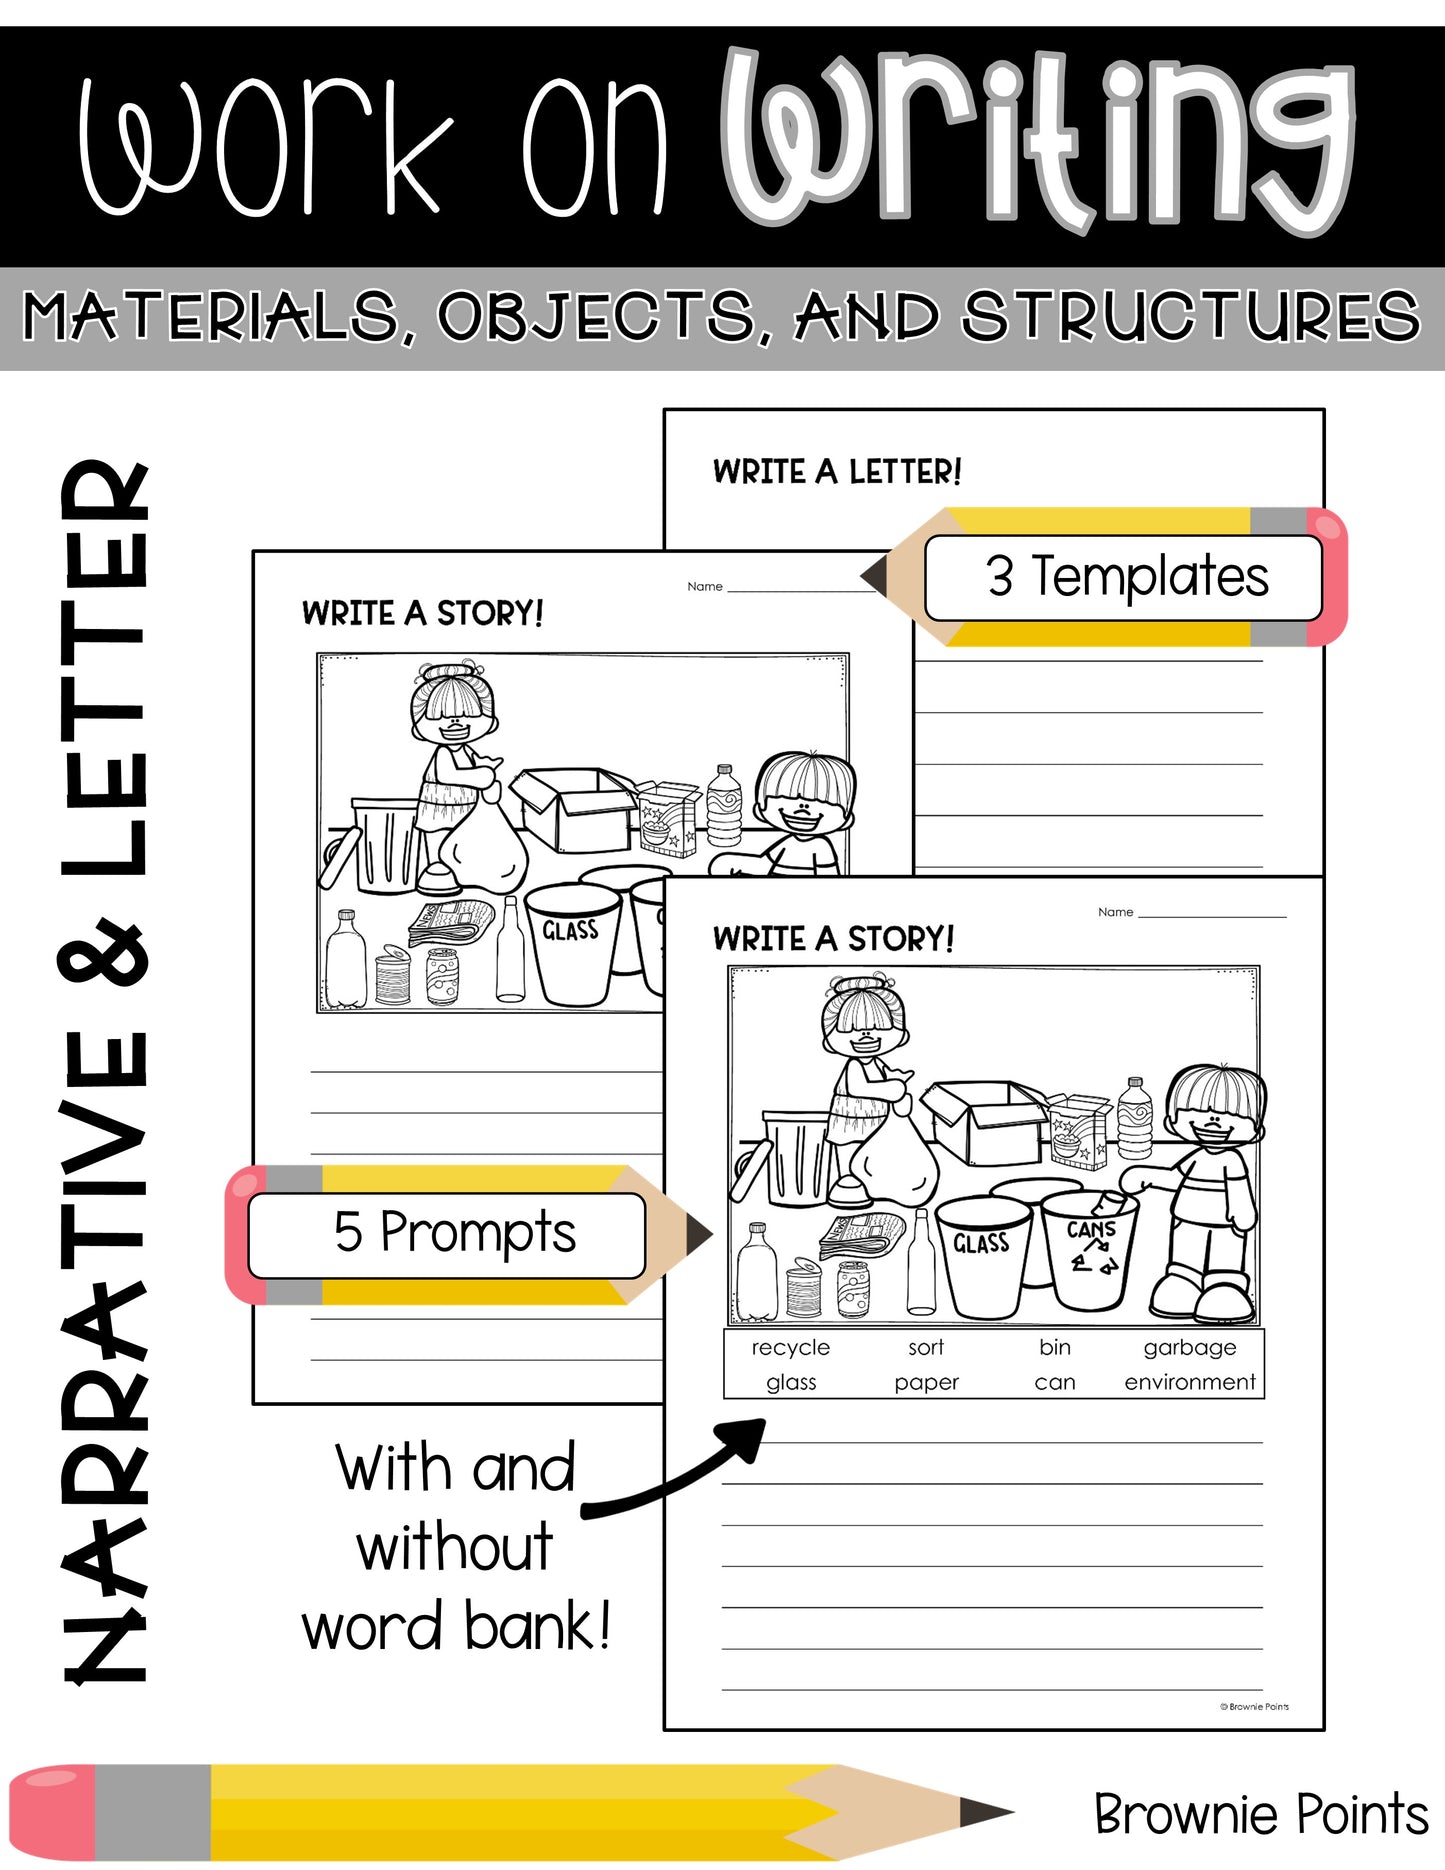 Work on Writing - Materials, Objects, and Structures